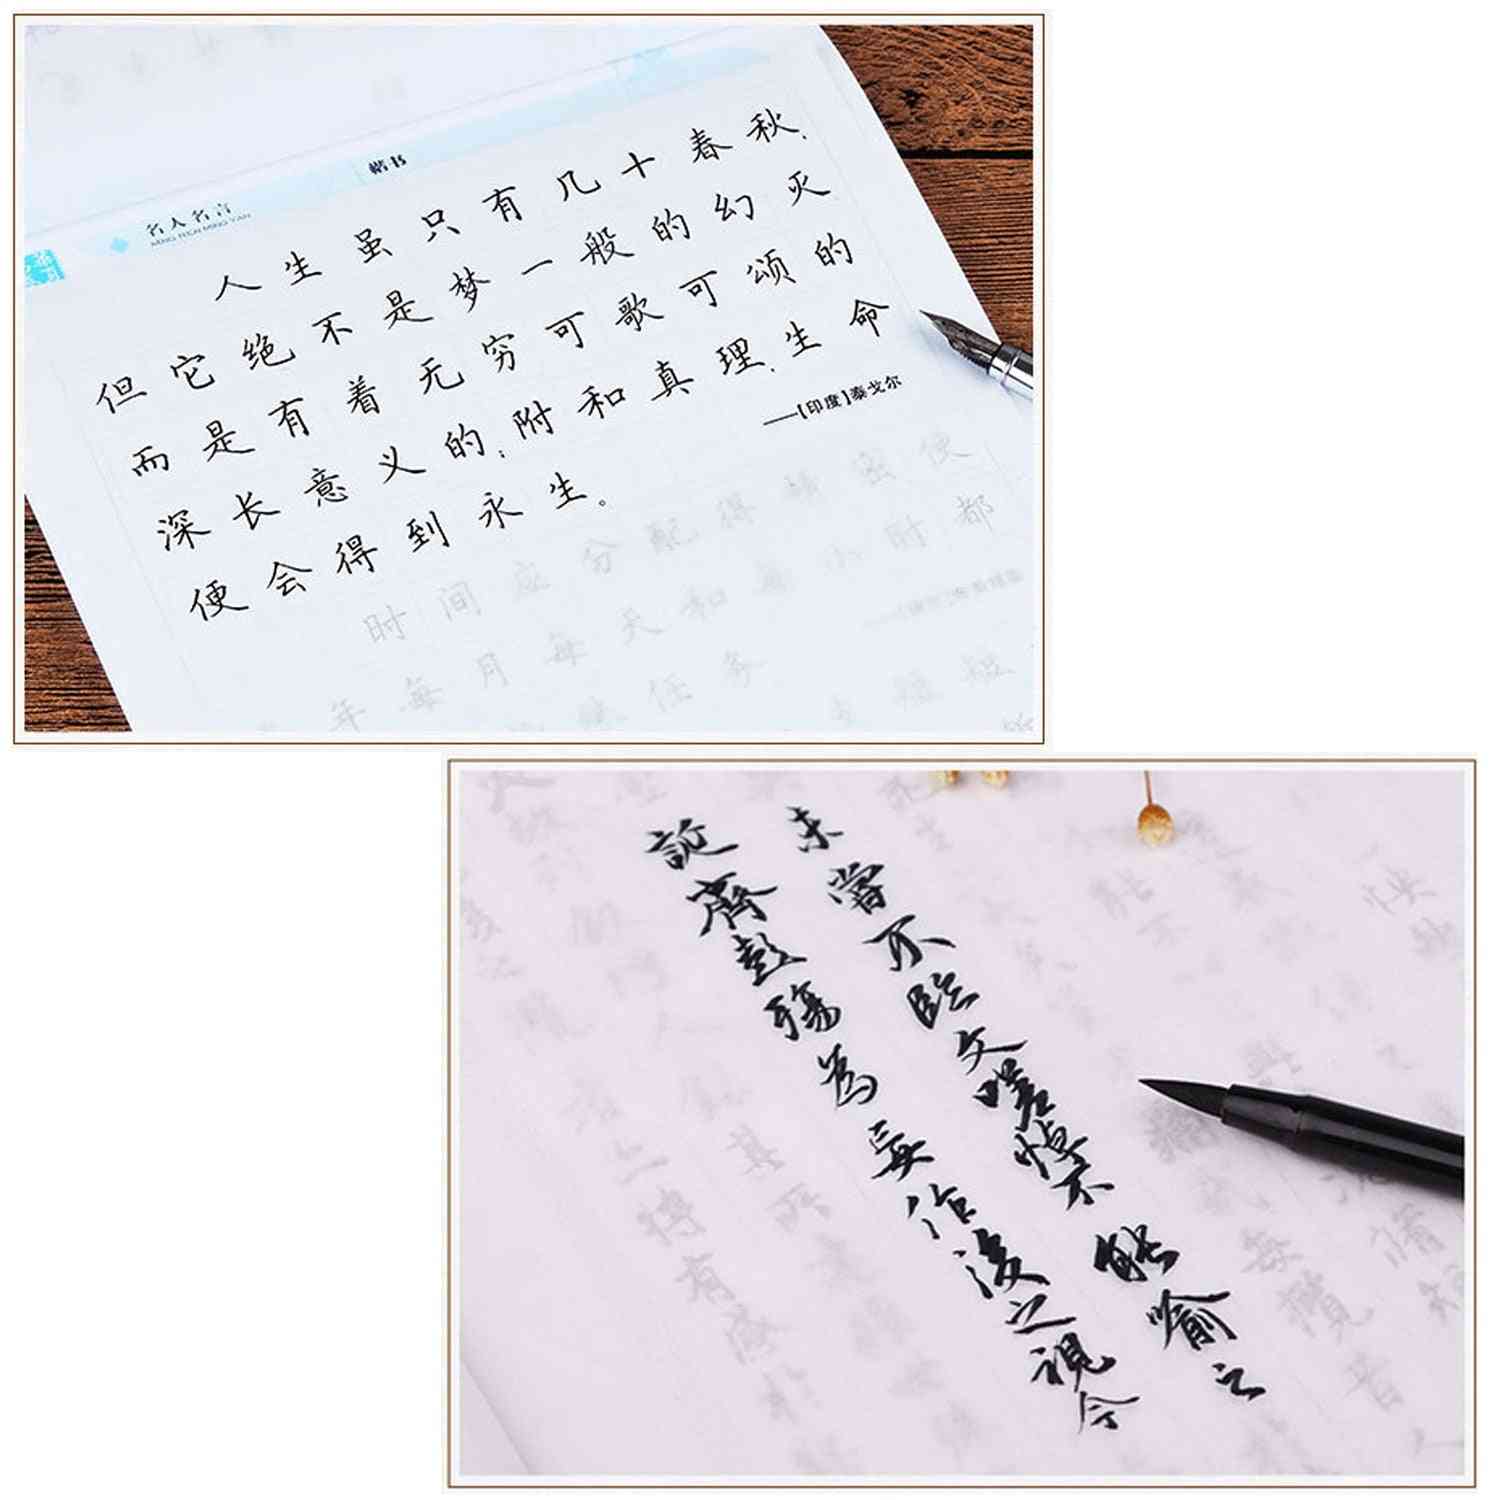 A4 Size Sketching Tracing Paper, Smooth Thick Translucent Diy Copying For Manga Art